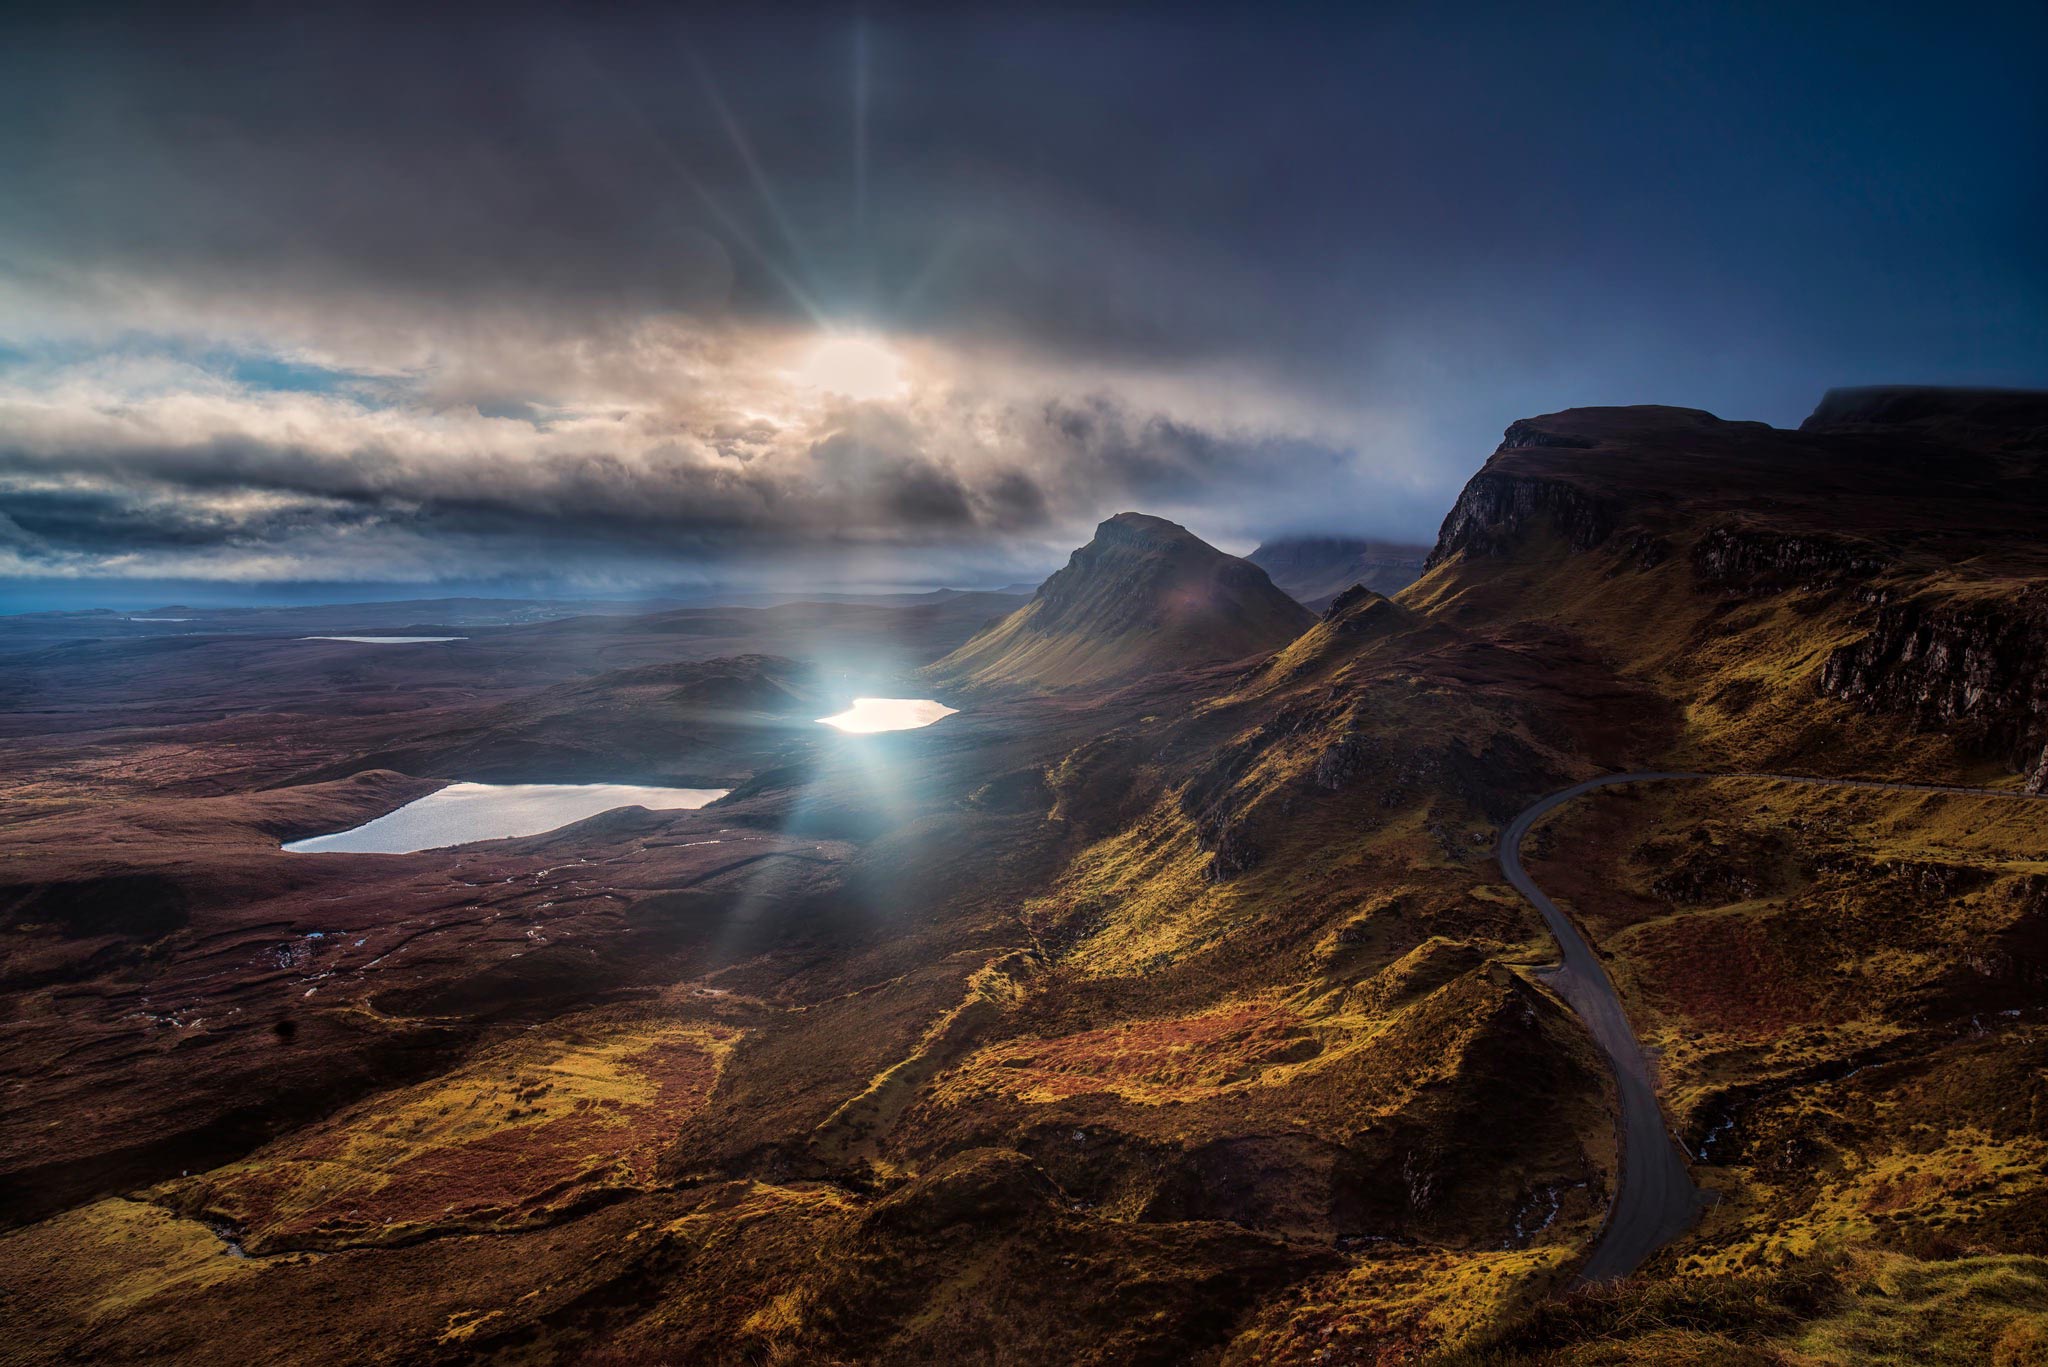 A stunning landscape photograph taken on the Isle of Skye in Scotland, featuring rugged mountains, winding roads, and tranquil lakes, illuminated by the golden rays of the sun. A stunning landscape photograph taken on the Isle of Skye in Scotland, featuring rugged mountains, winding roads, and tranquil lakes, illuminated by the golden rays of the sun.